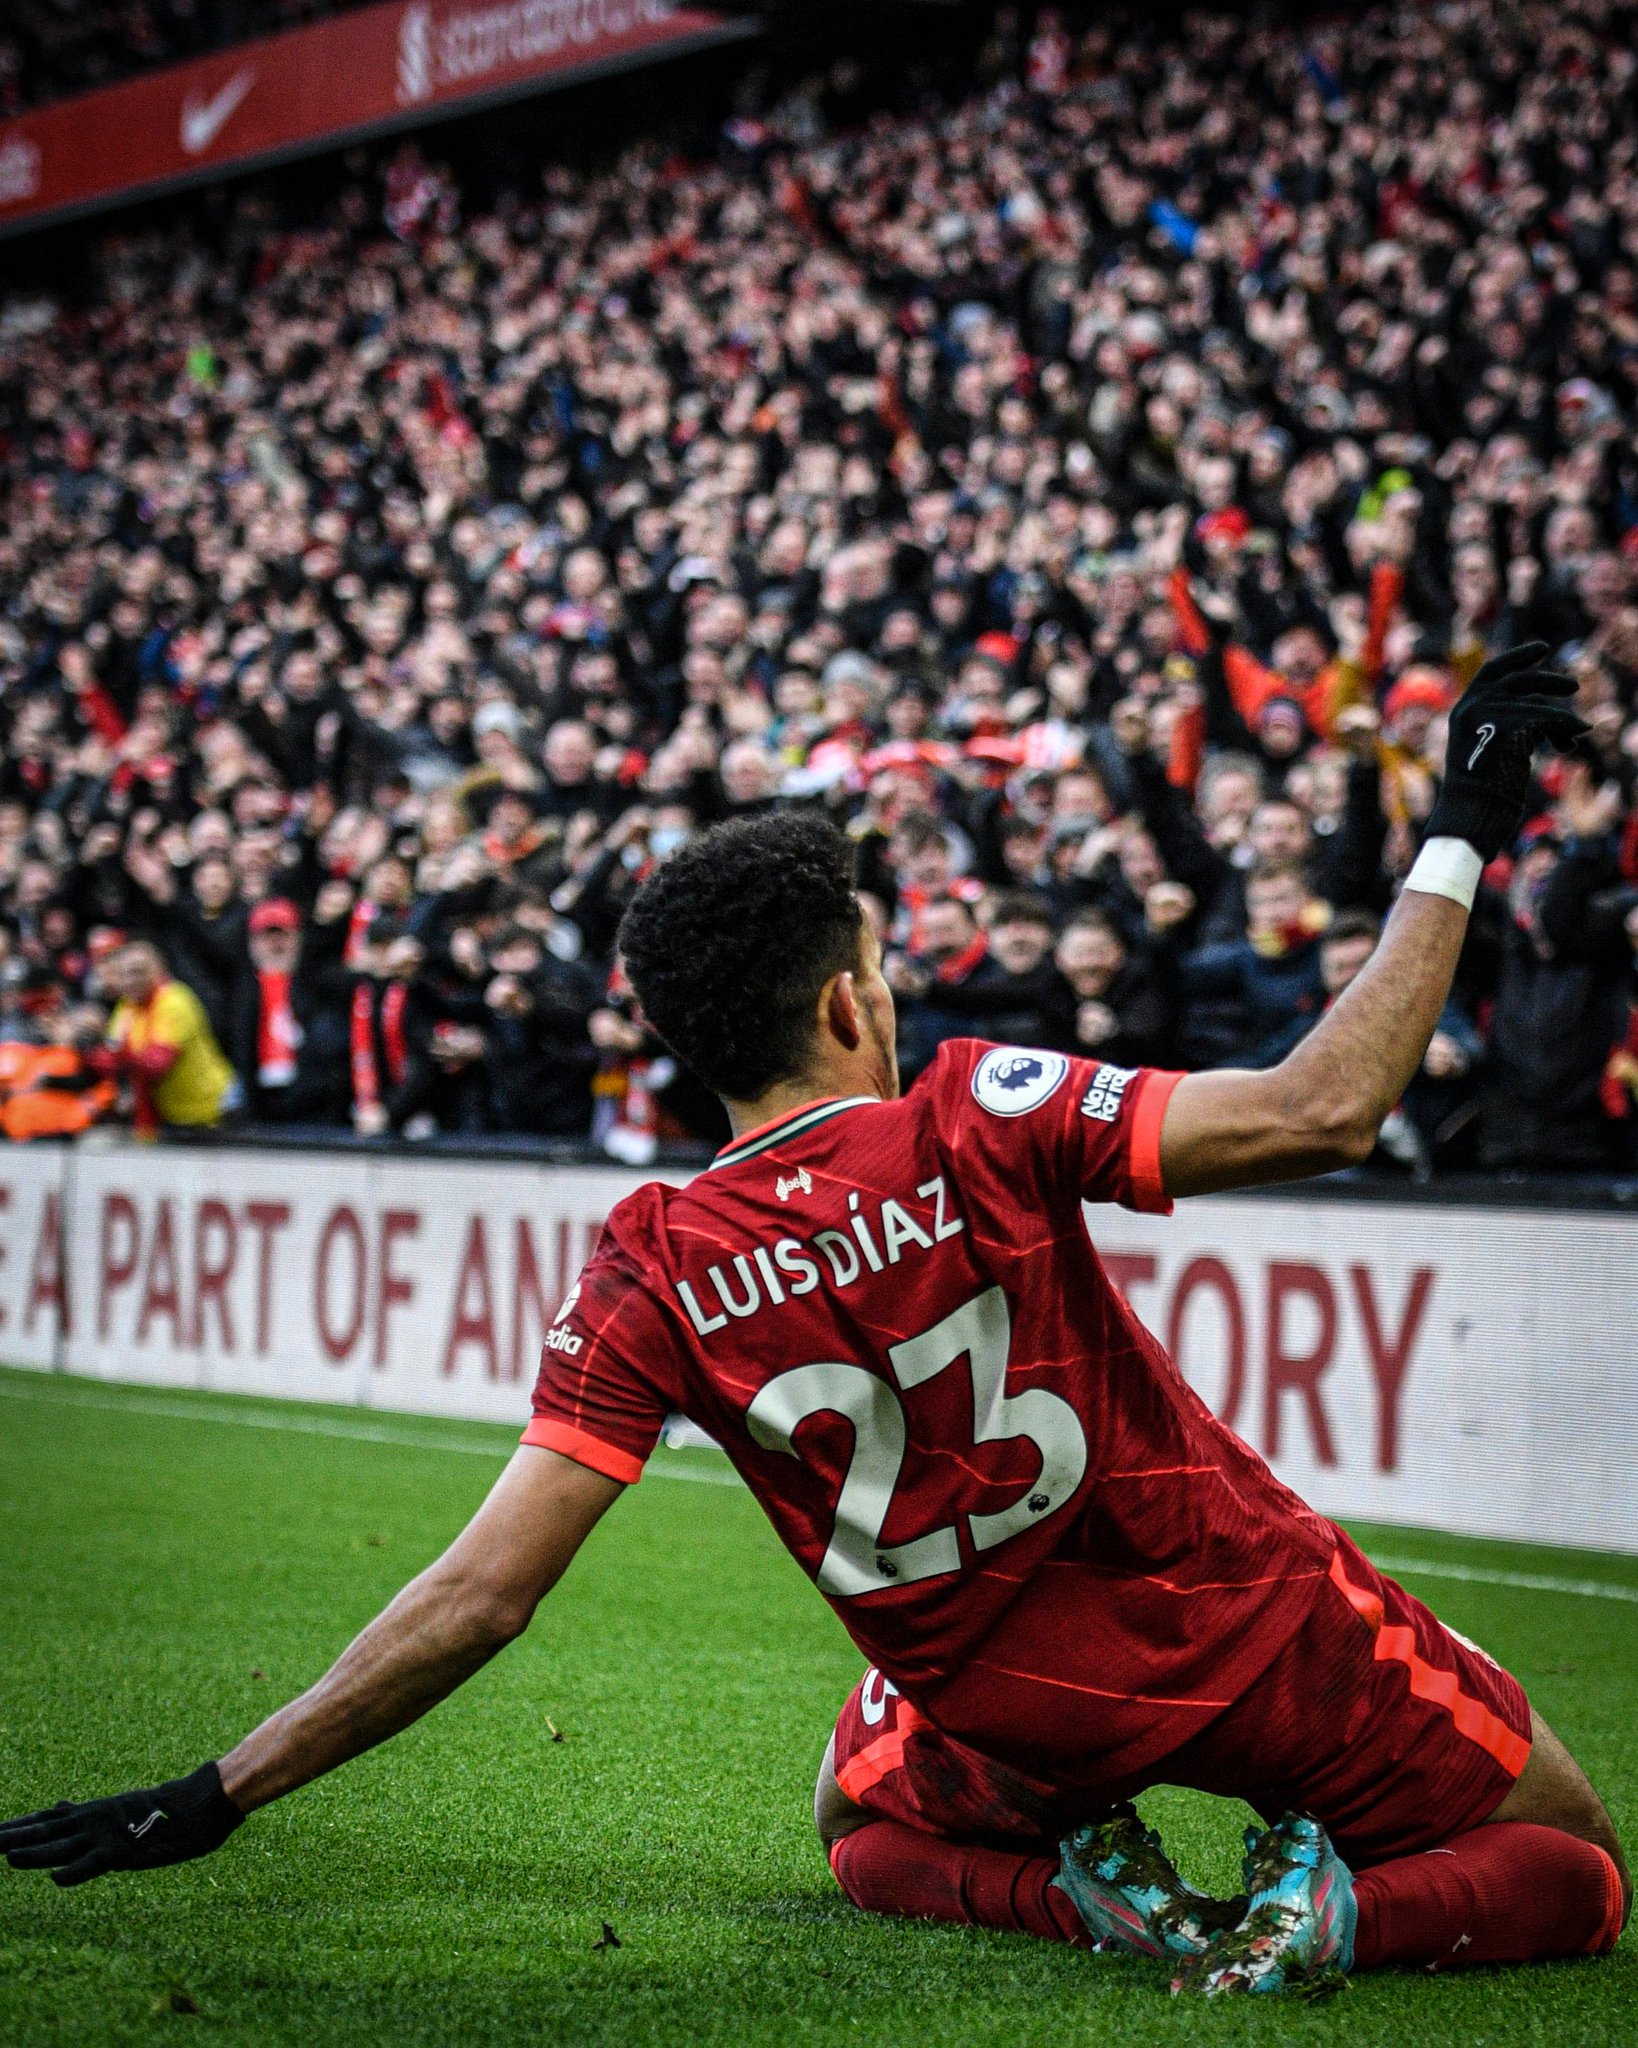 GOAL India Liverpool goal in front of the Kop for Luis Diaz ❤️